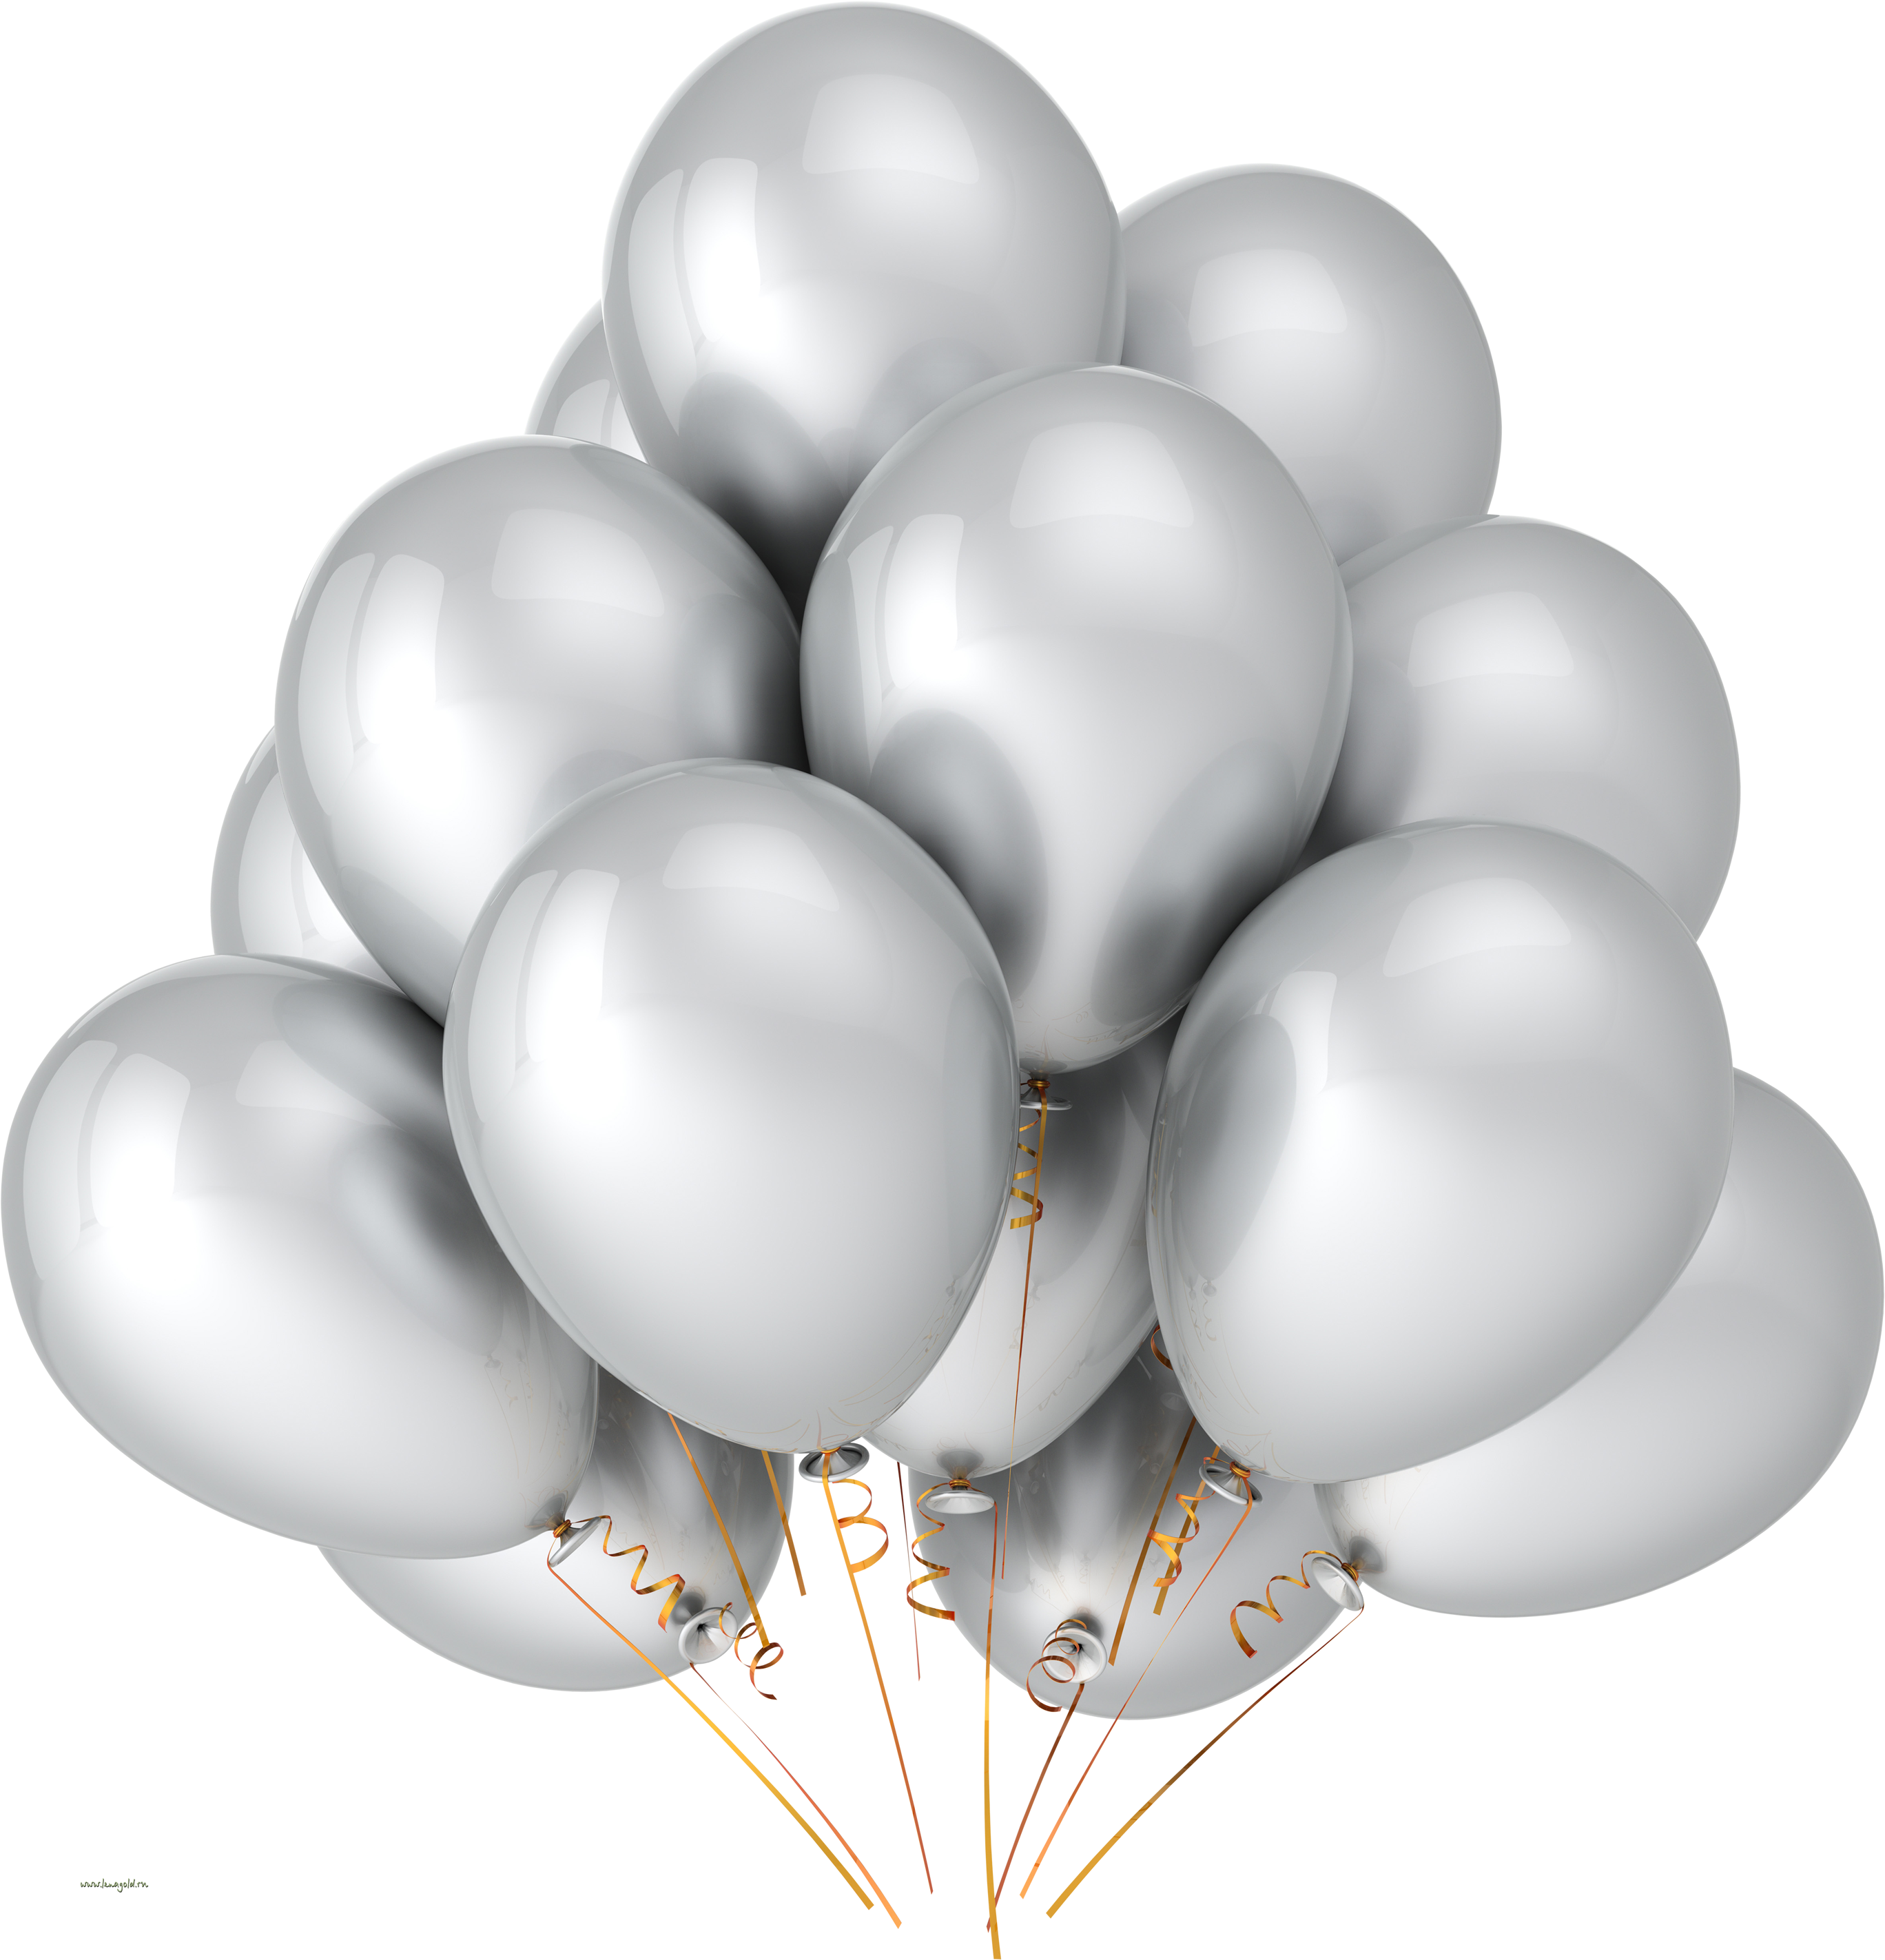 Download Png Image  Yellow Balloons Png Image Free Download Balloons